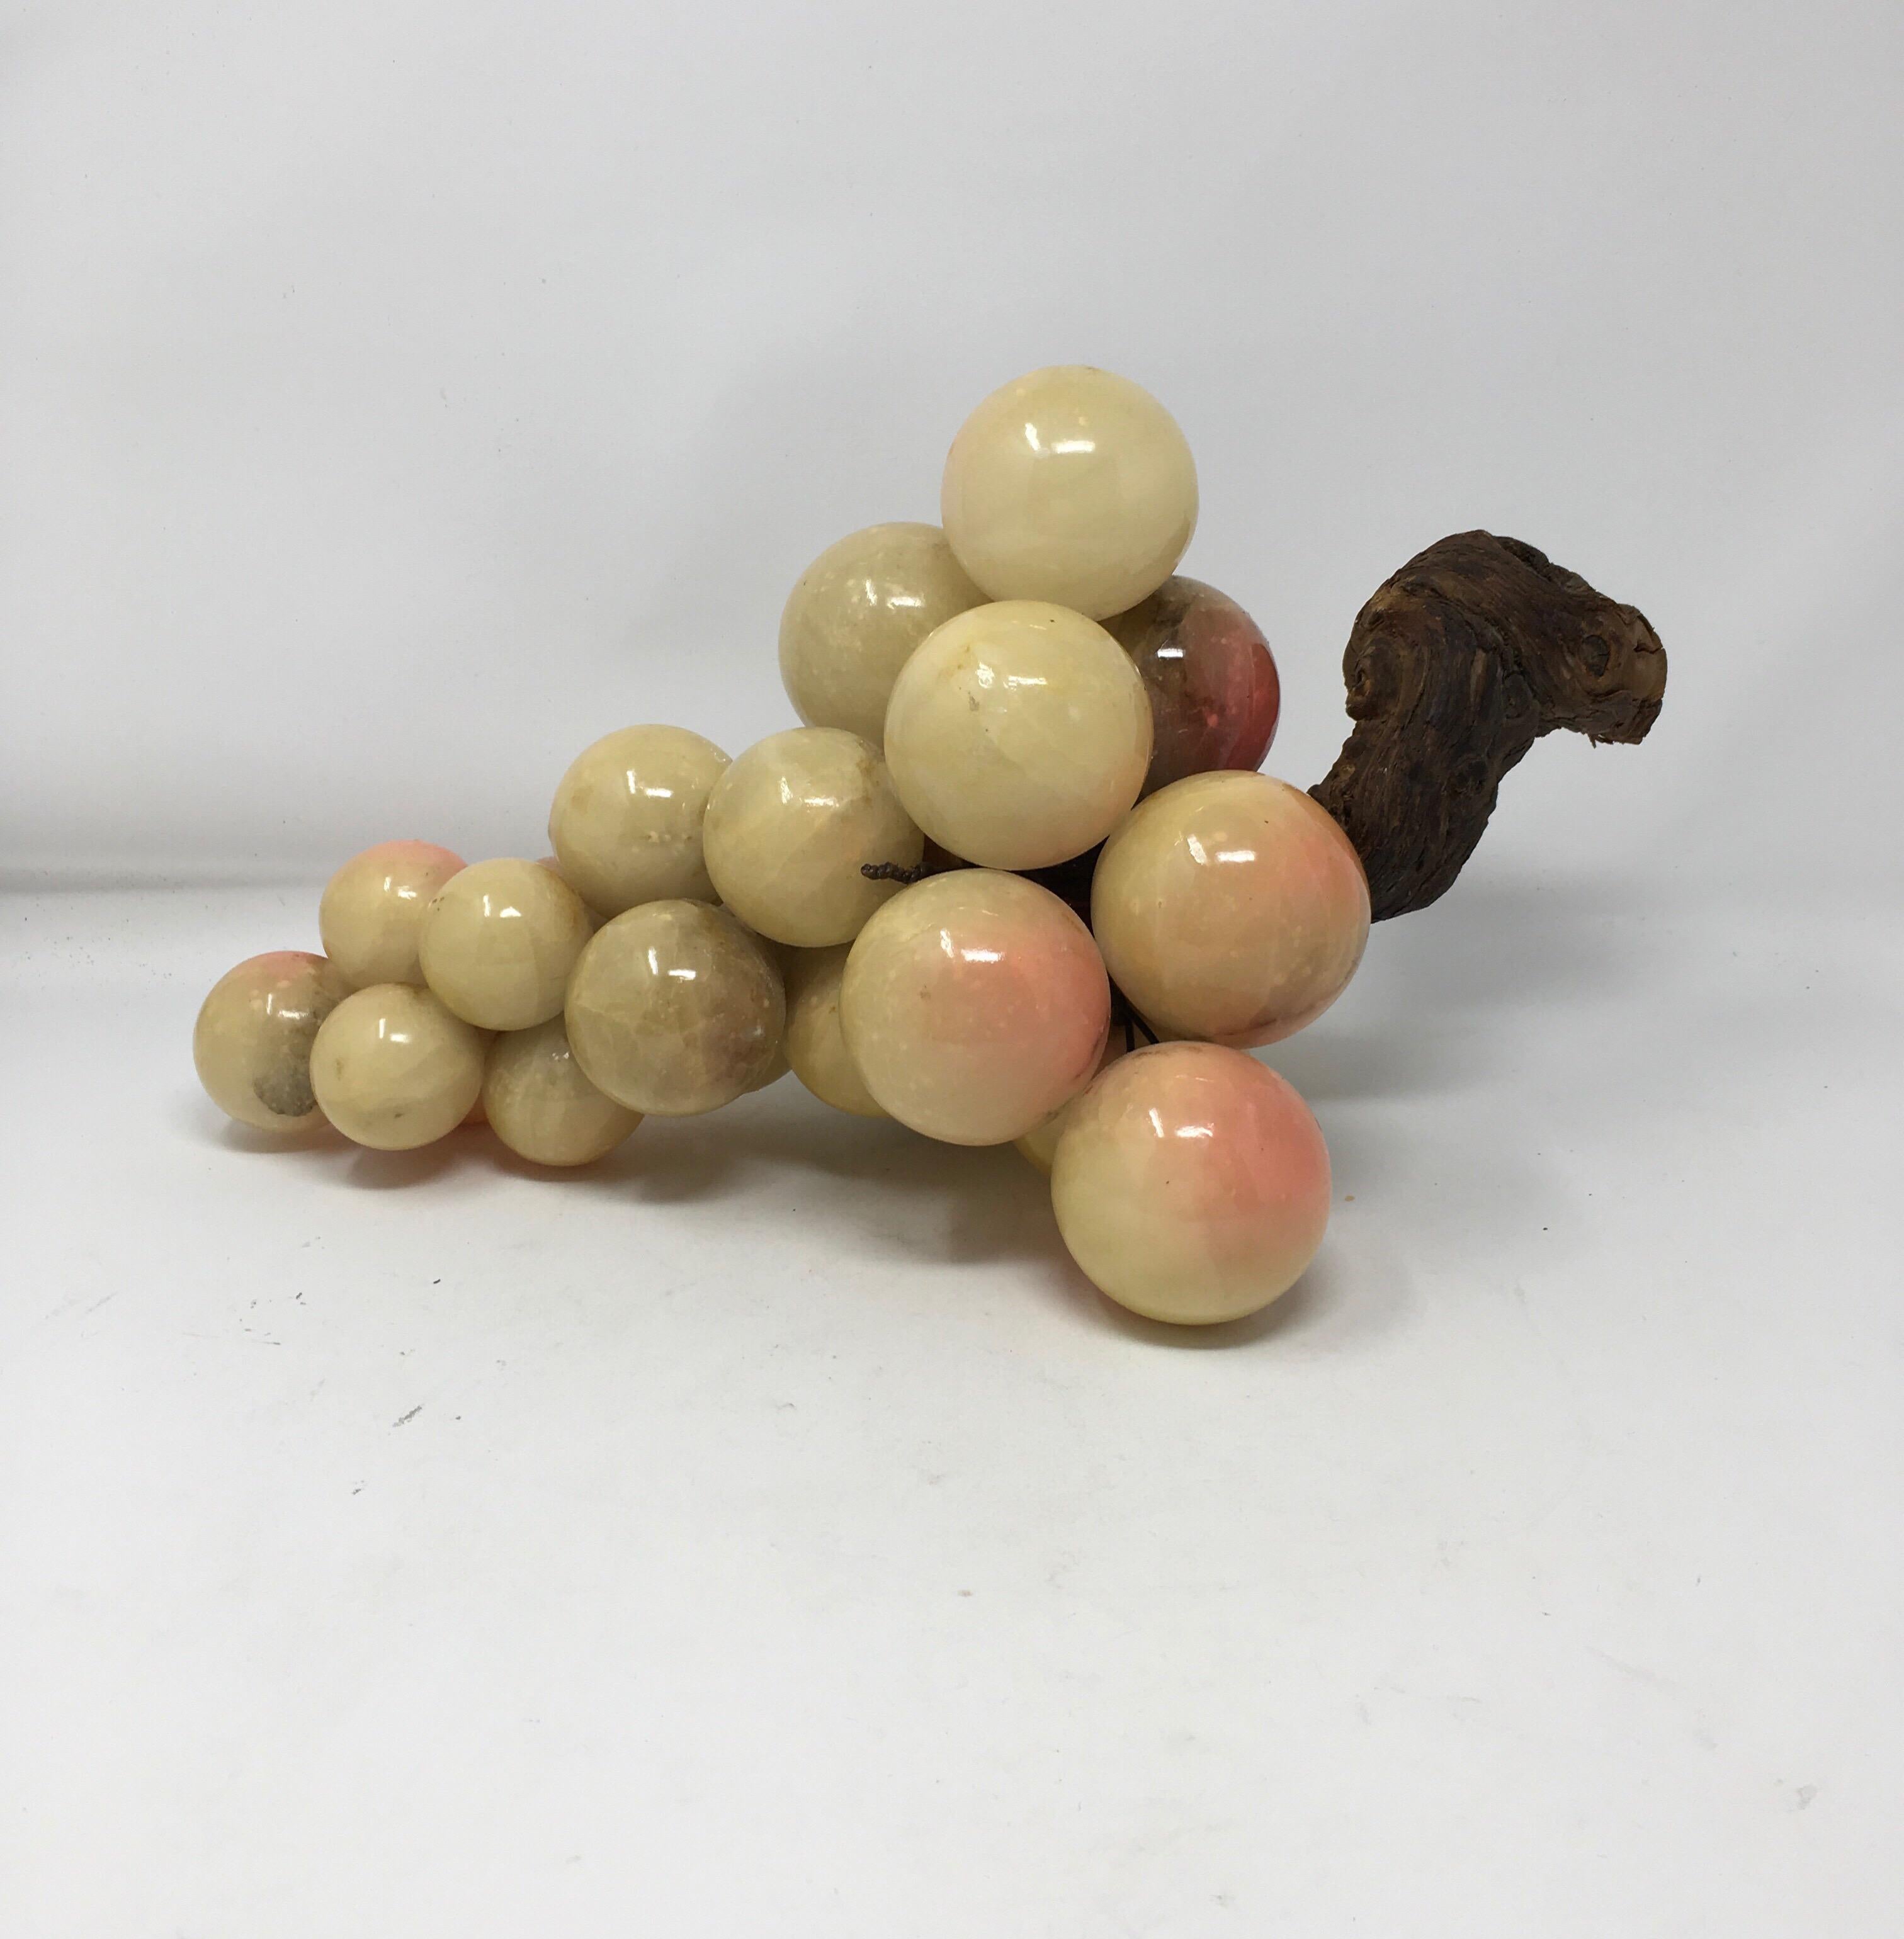 This cluster of colorful vintage Italian Alabaster grapes are handcrafted with a real wood grape vine branch handle. Each grape is hand painted to create a realistic appearance. These grapes would make a great addition to any centerpiece or would